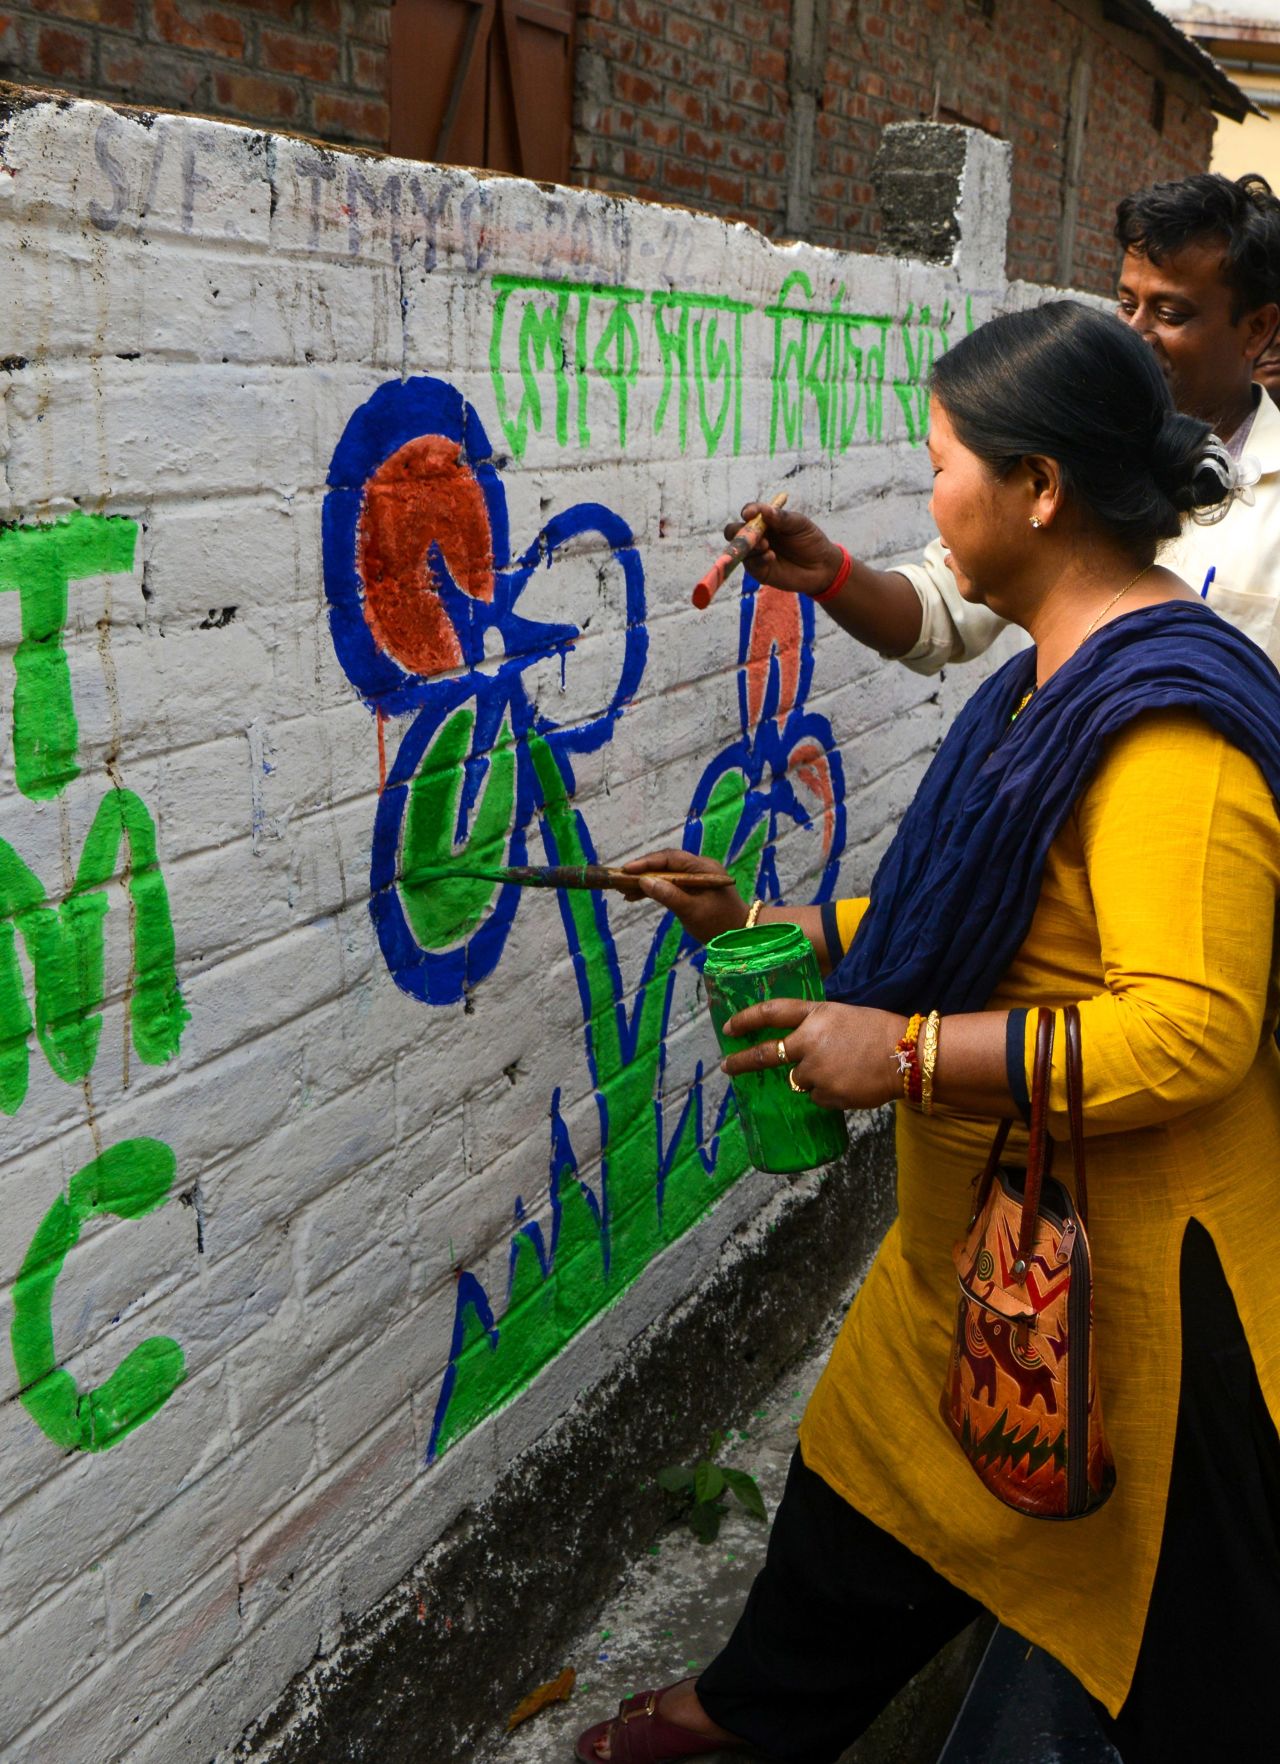 Supporters of the All India Trinamool Congress (TMC) paint the party's symbol on a wall ahead of the 2019 general election.